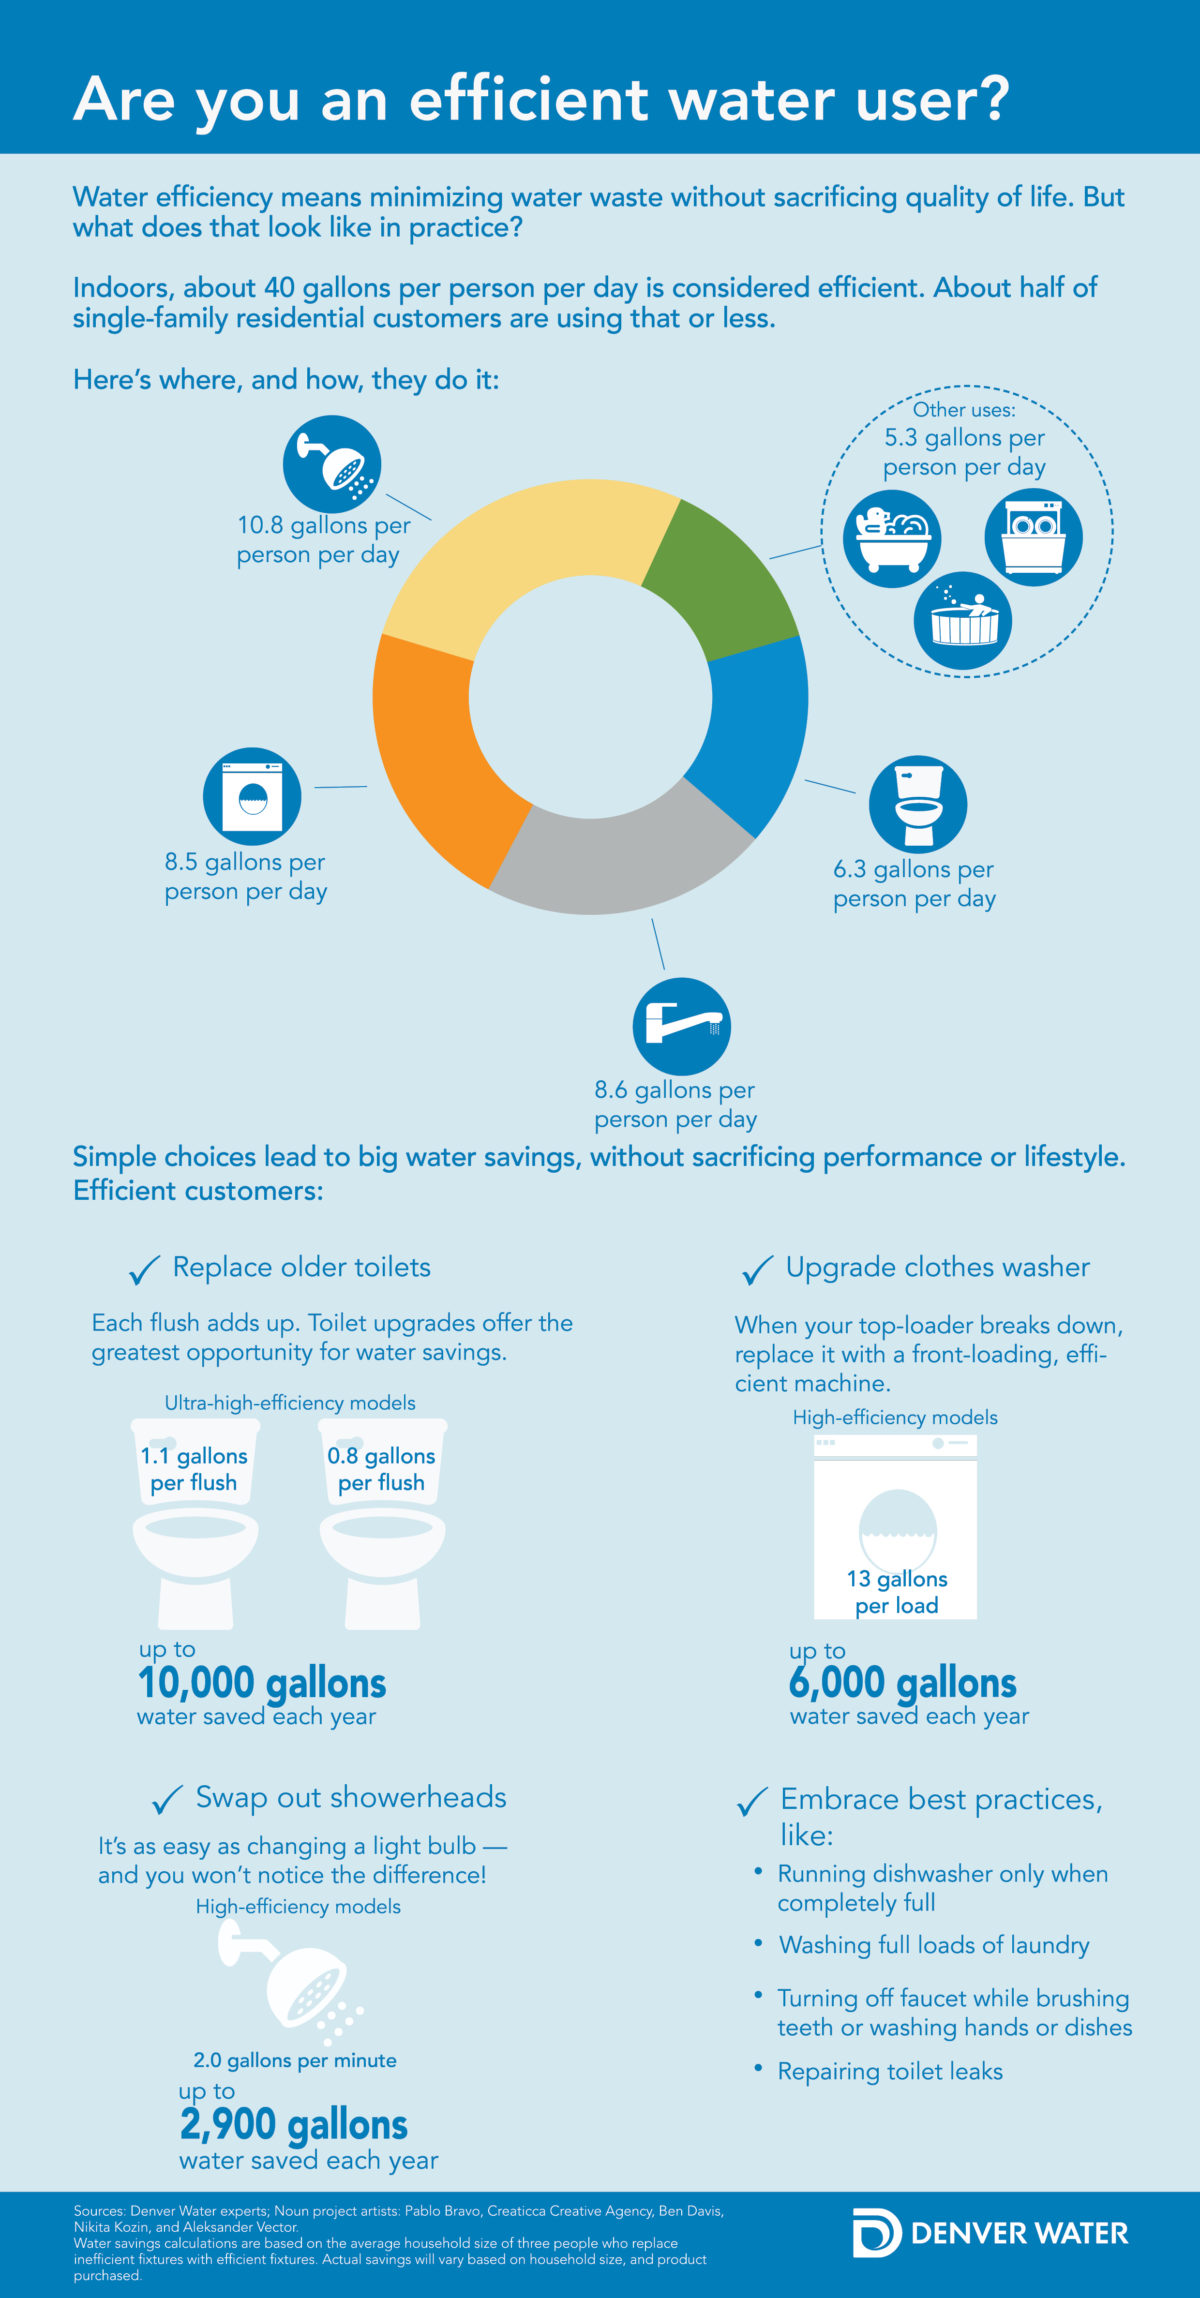 Are you an efficient water user? Graphic.